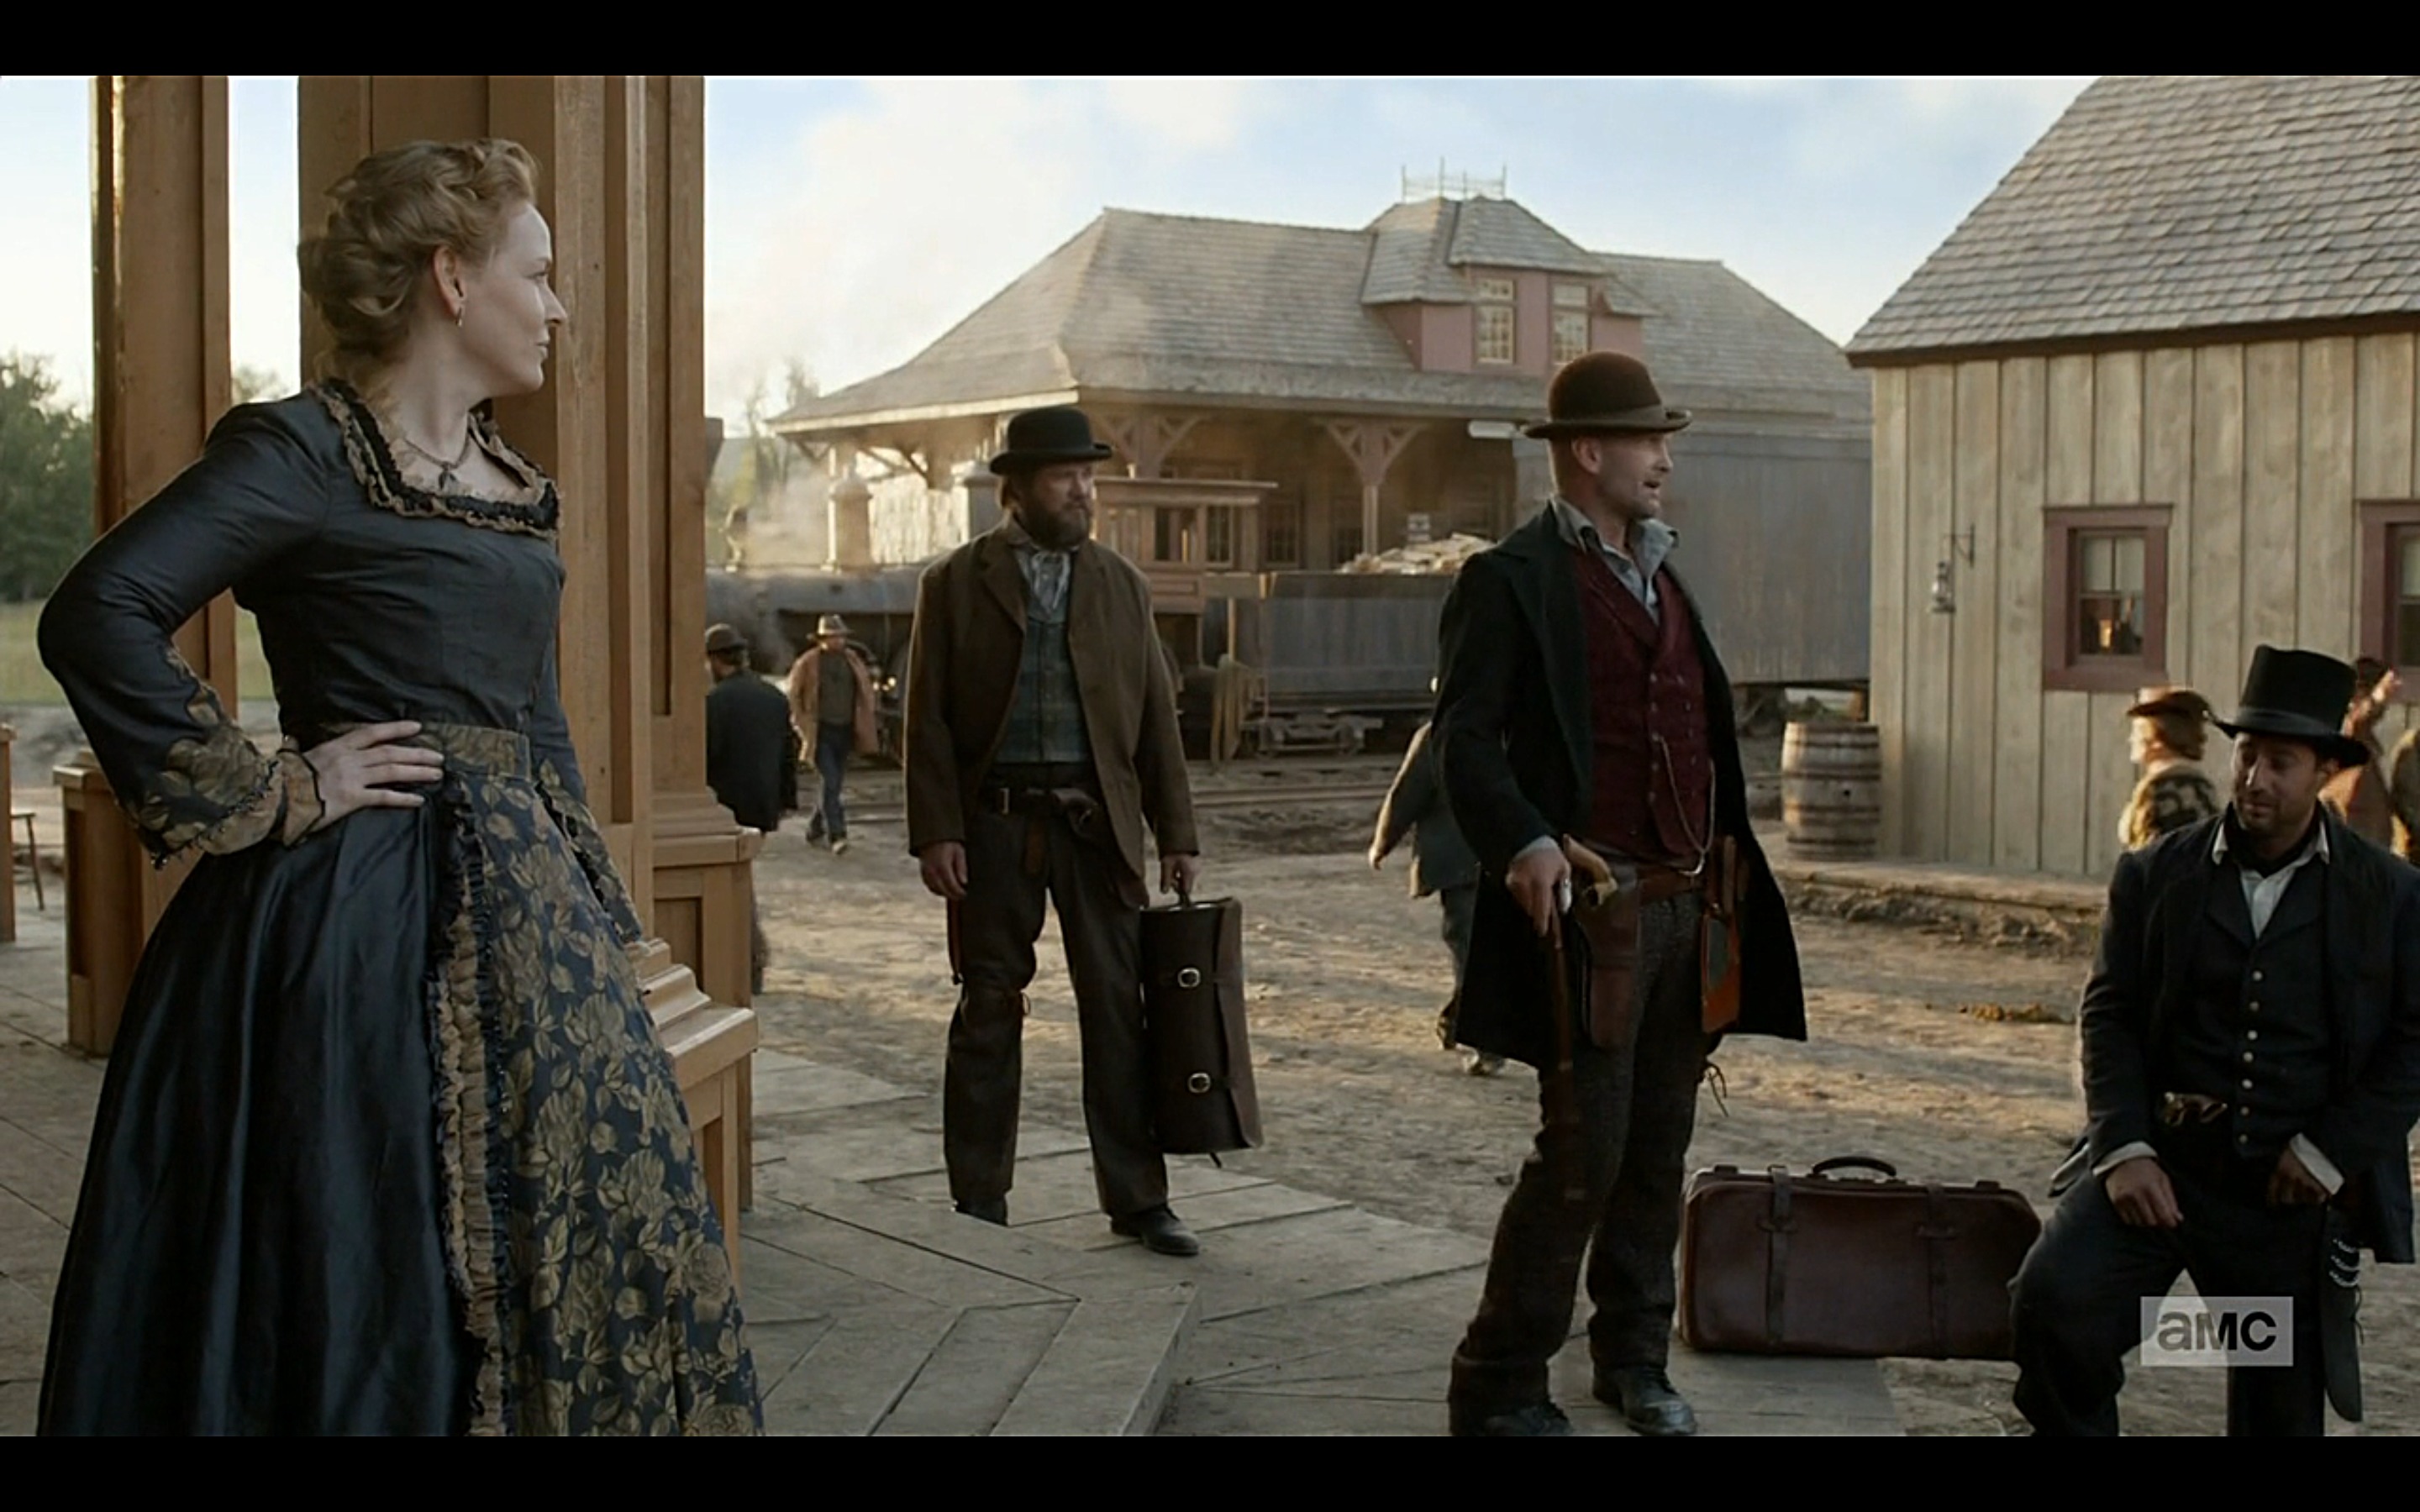 Looking for Mickey and protecting my boss, #AndrewHoward aka Dandy Johnny Shea after rolling into Cheyenne from New York. With #ChelahHorsdal aka Maggie Palmer. #deadrabbits roll into Cheyenne. #hellonwheels episode 4.11 #bleedingkansas